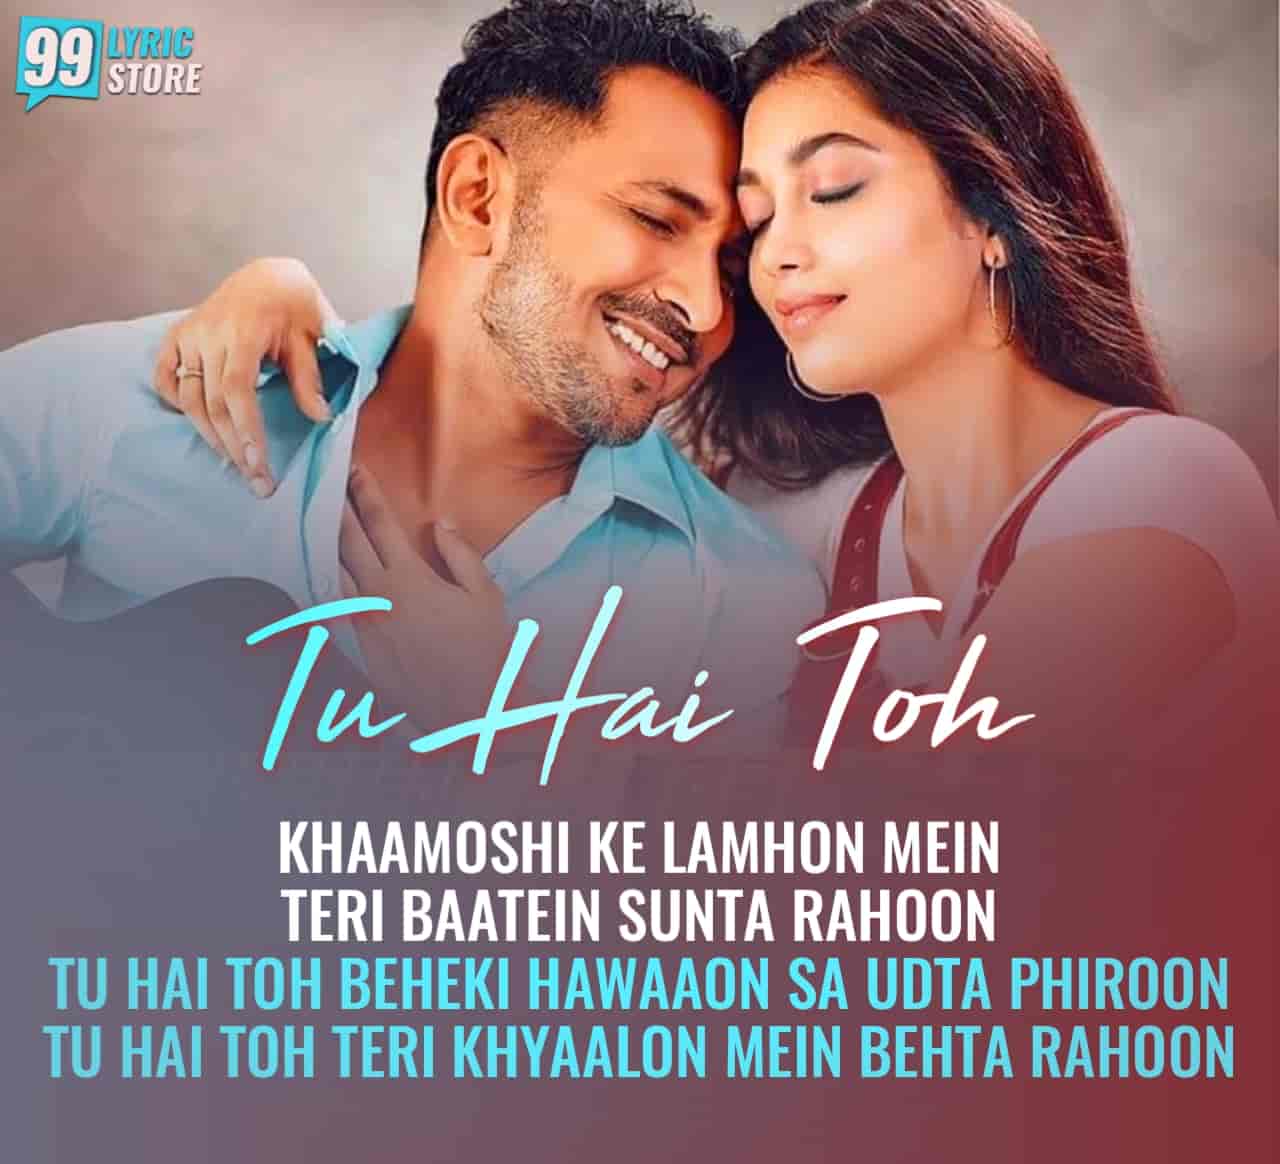 Tu Hai Toh Song Image Features Terence Lewis and Digangna Suryavanshi